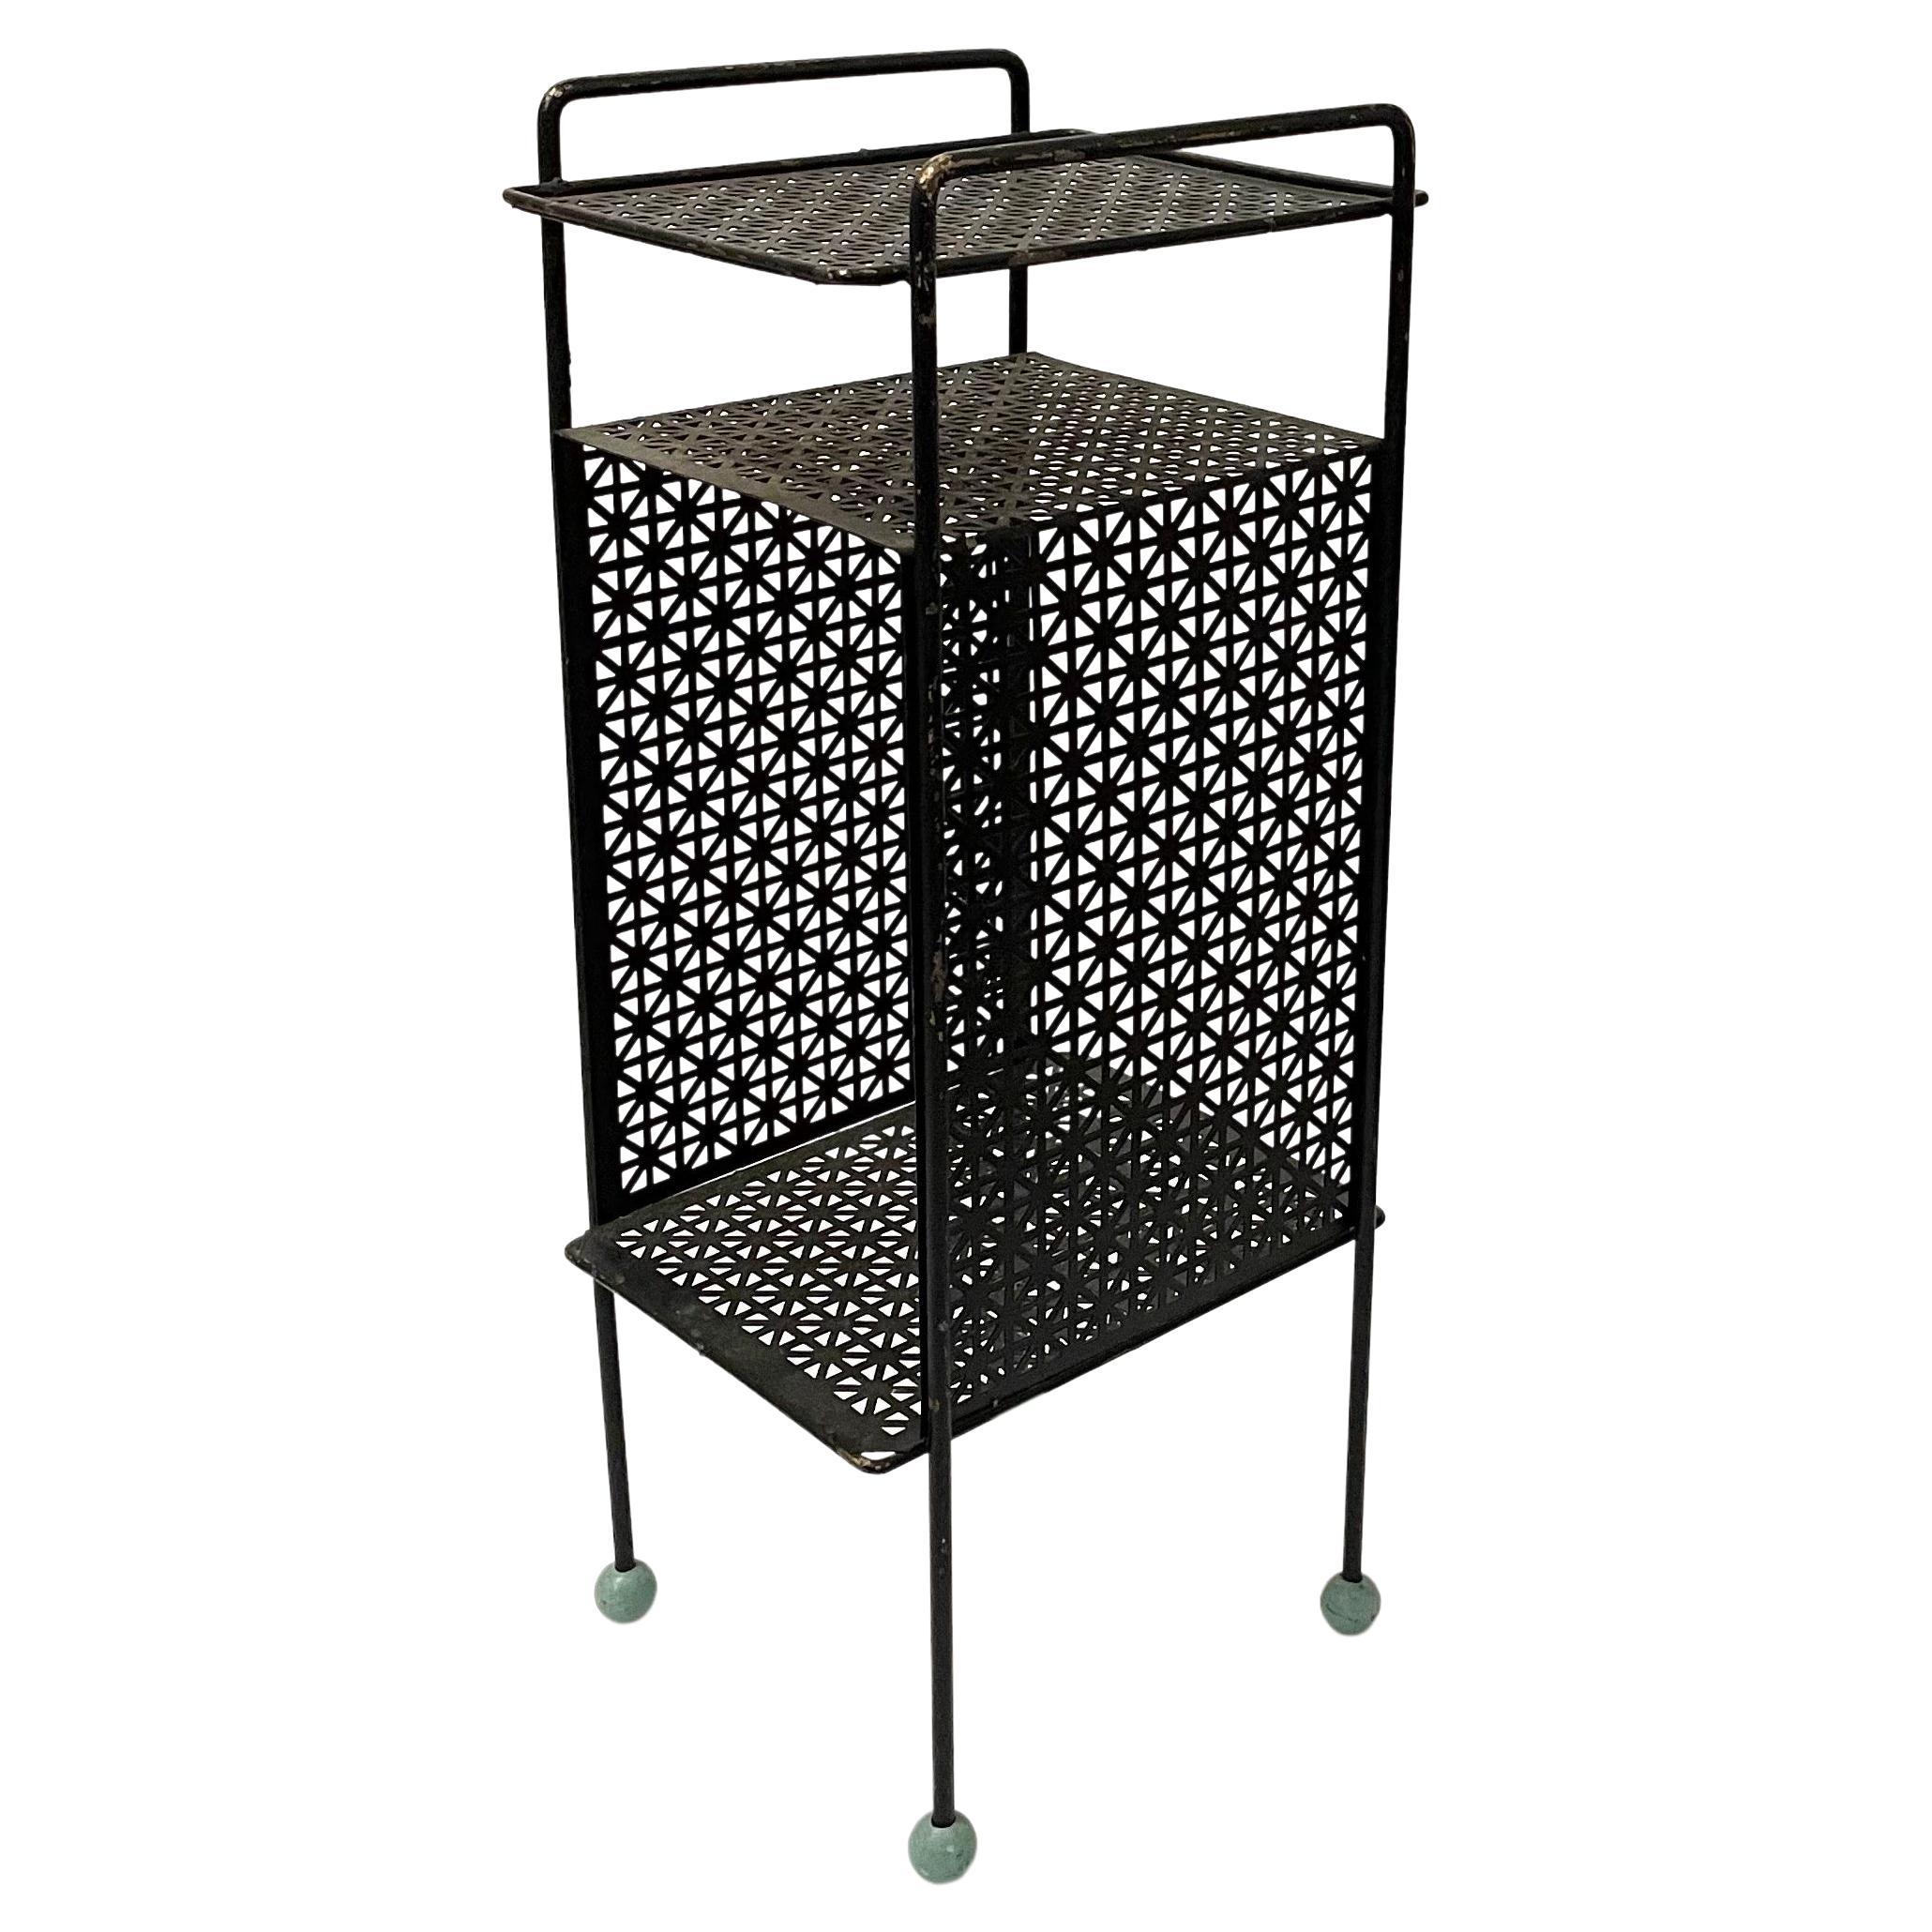 Atomic Age Perforated Metal Record/Telephone Stand